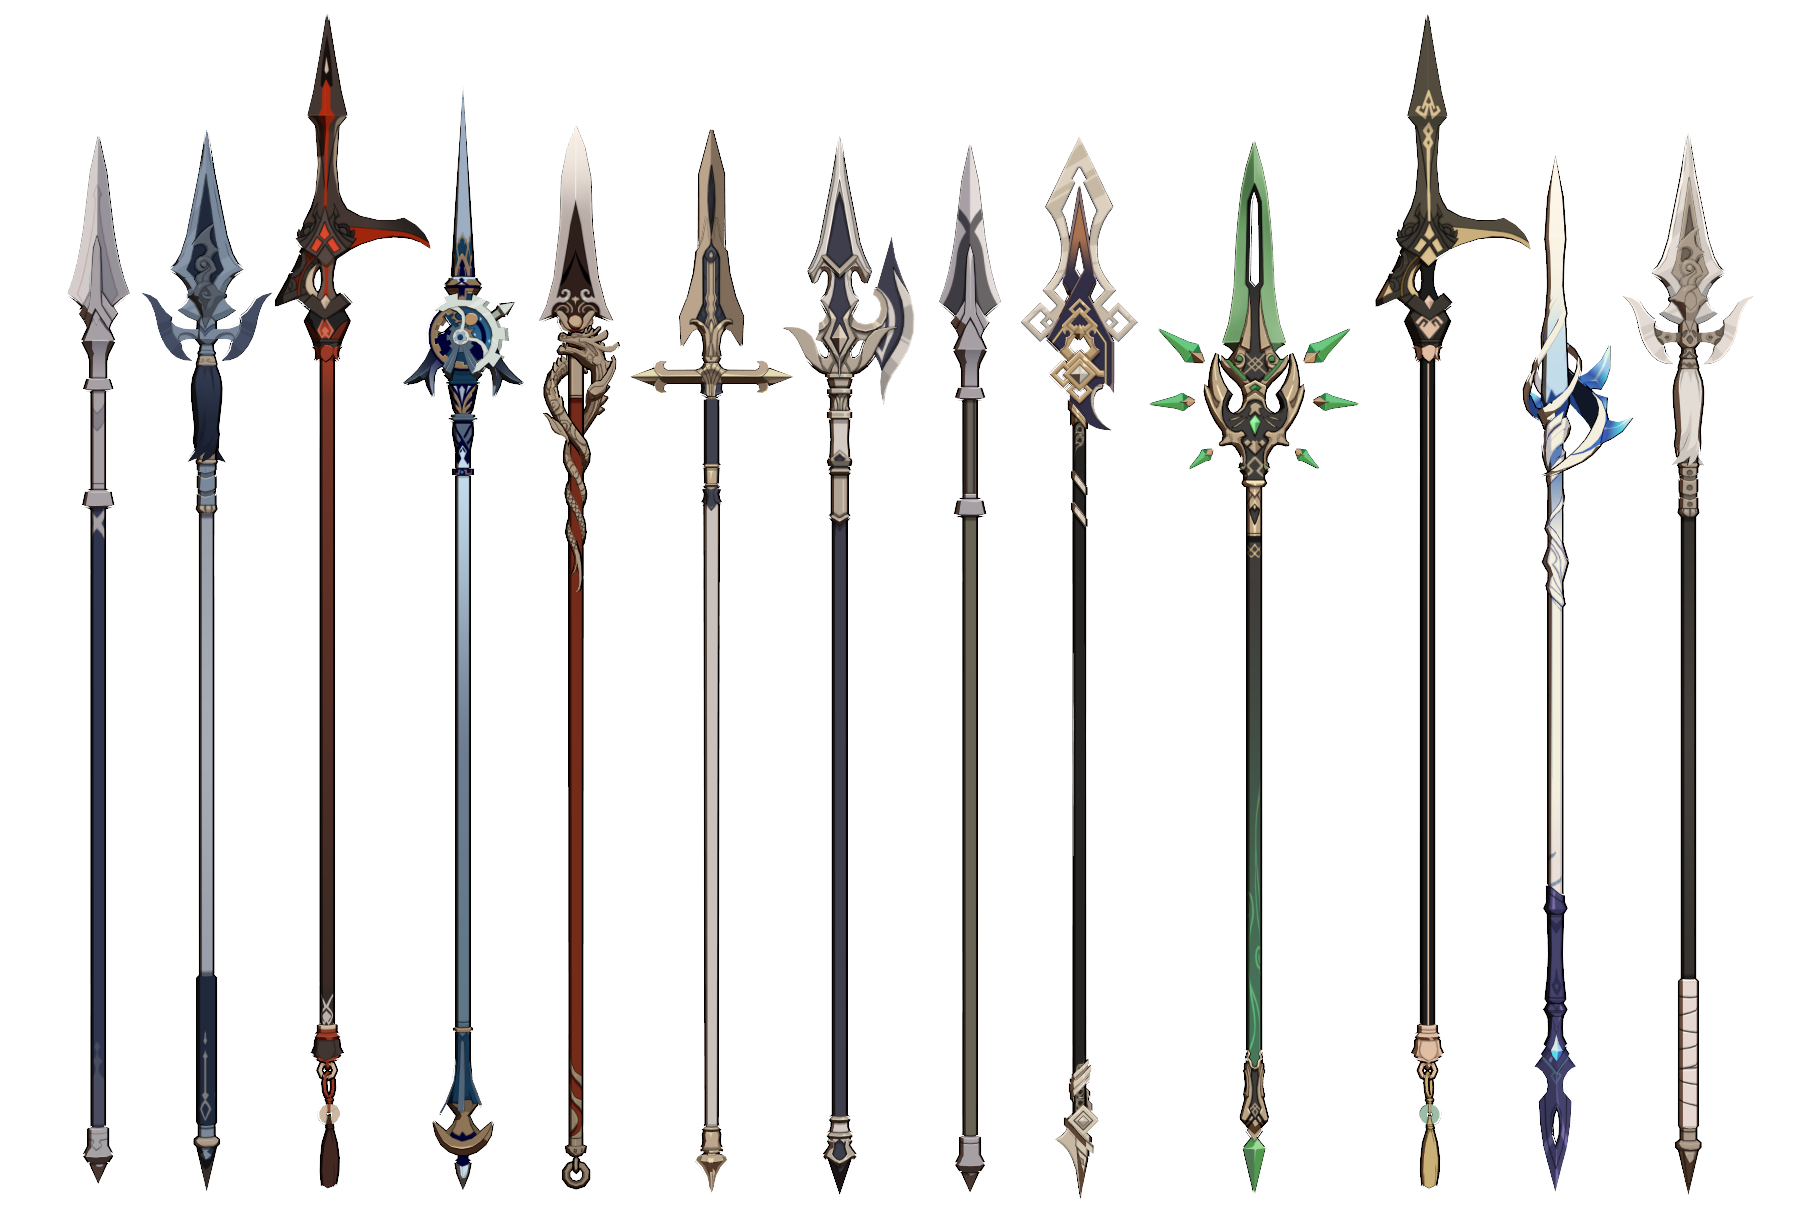 MMD Genshin Impact Polearm/Spear Set DL by CherryPieWithPoison on